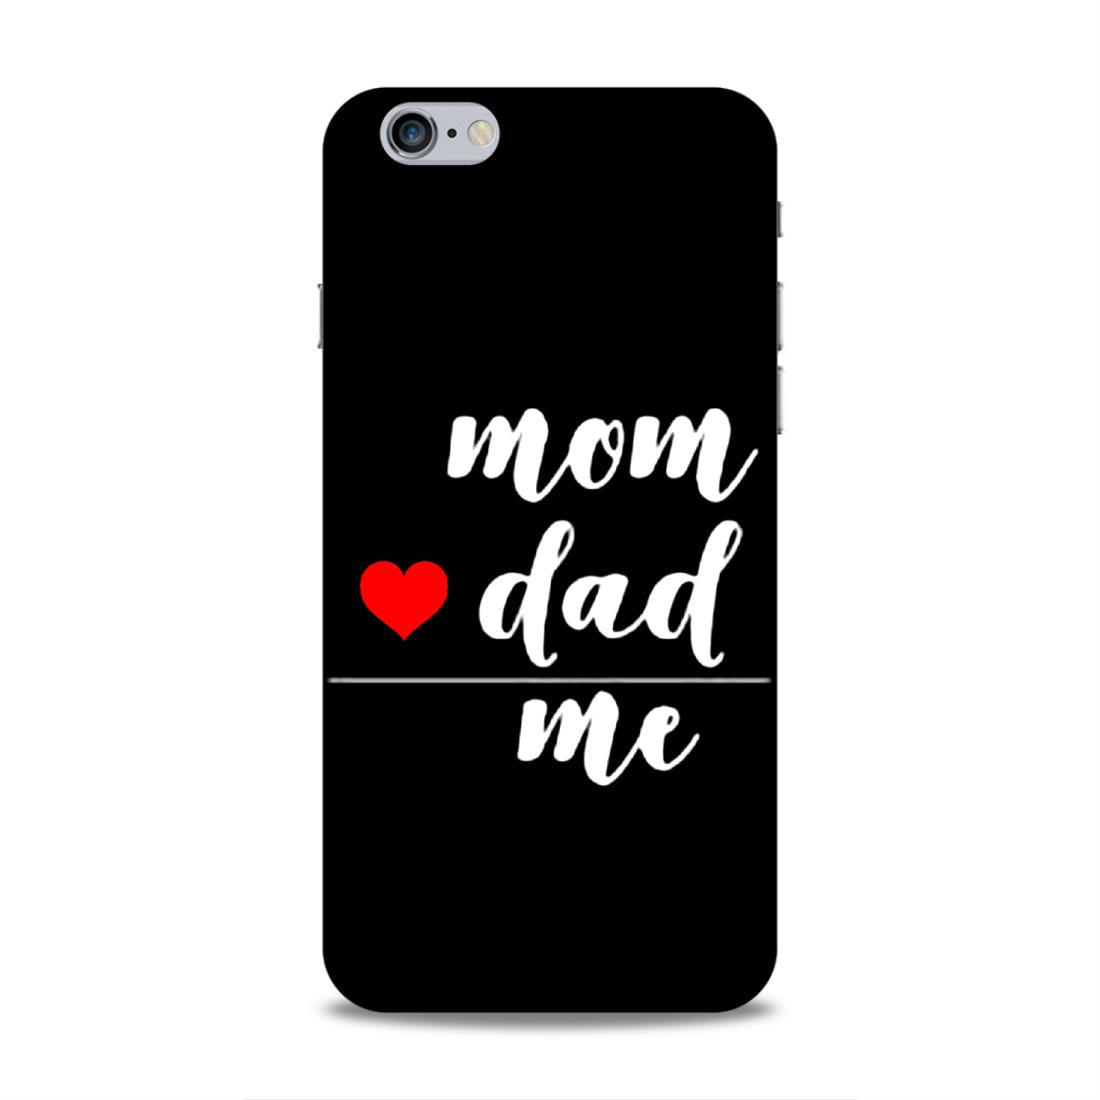 Mom Love Dad Me Hard Back Case For Apple iPhone 6 Plus / 6s Plus